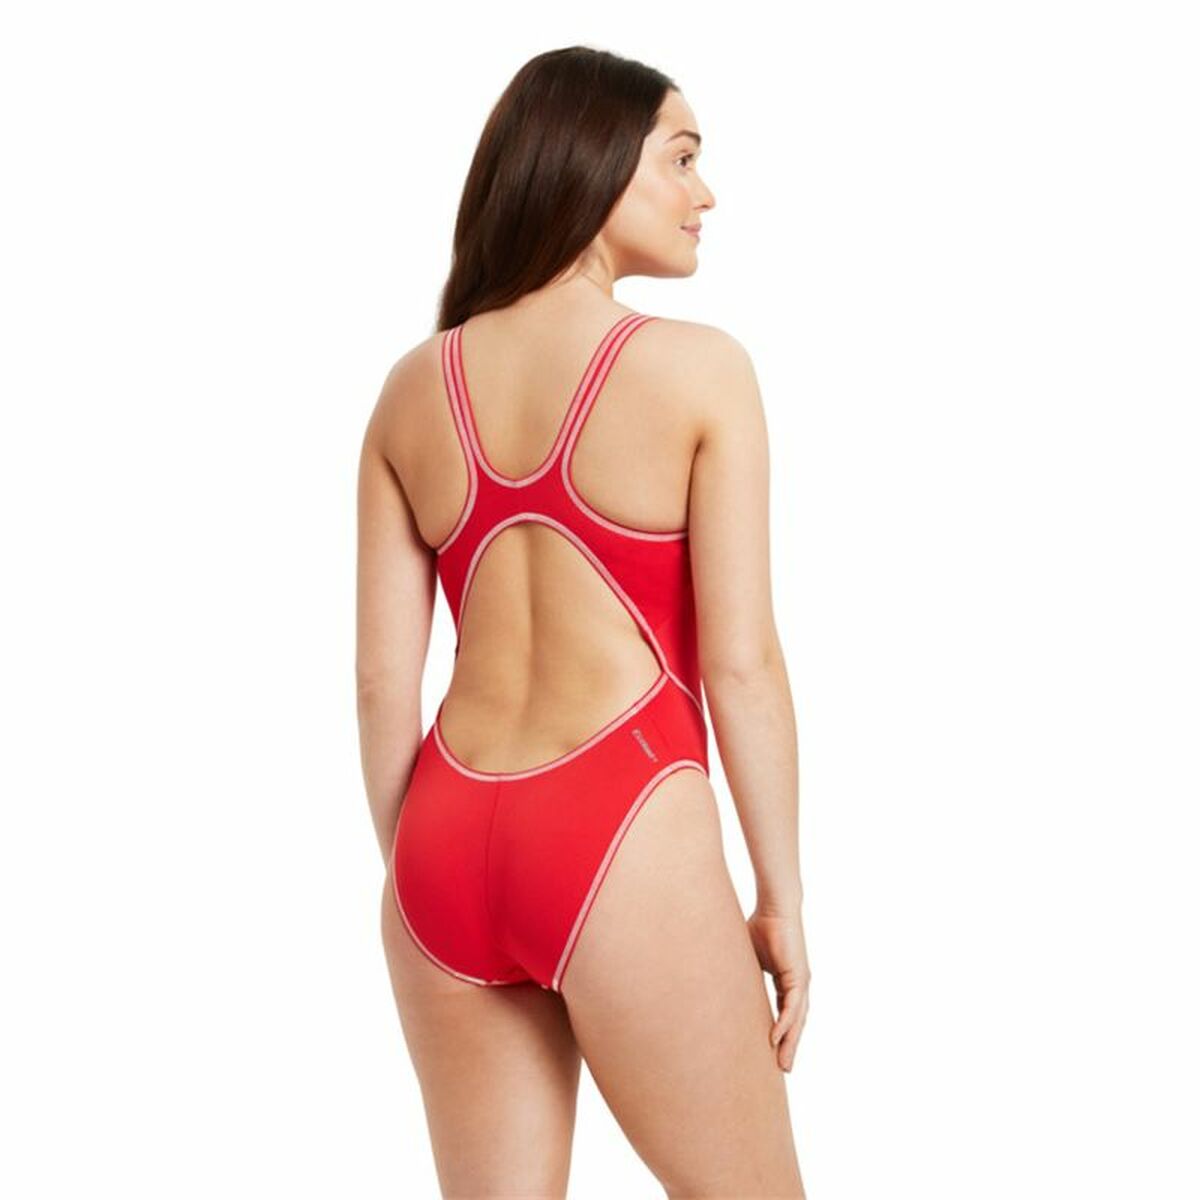 Women’s Bathing Costume Zoggs Wire Masterback Red